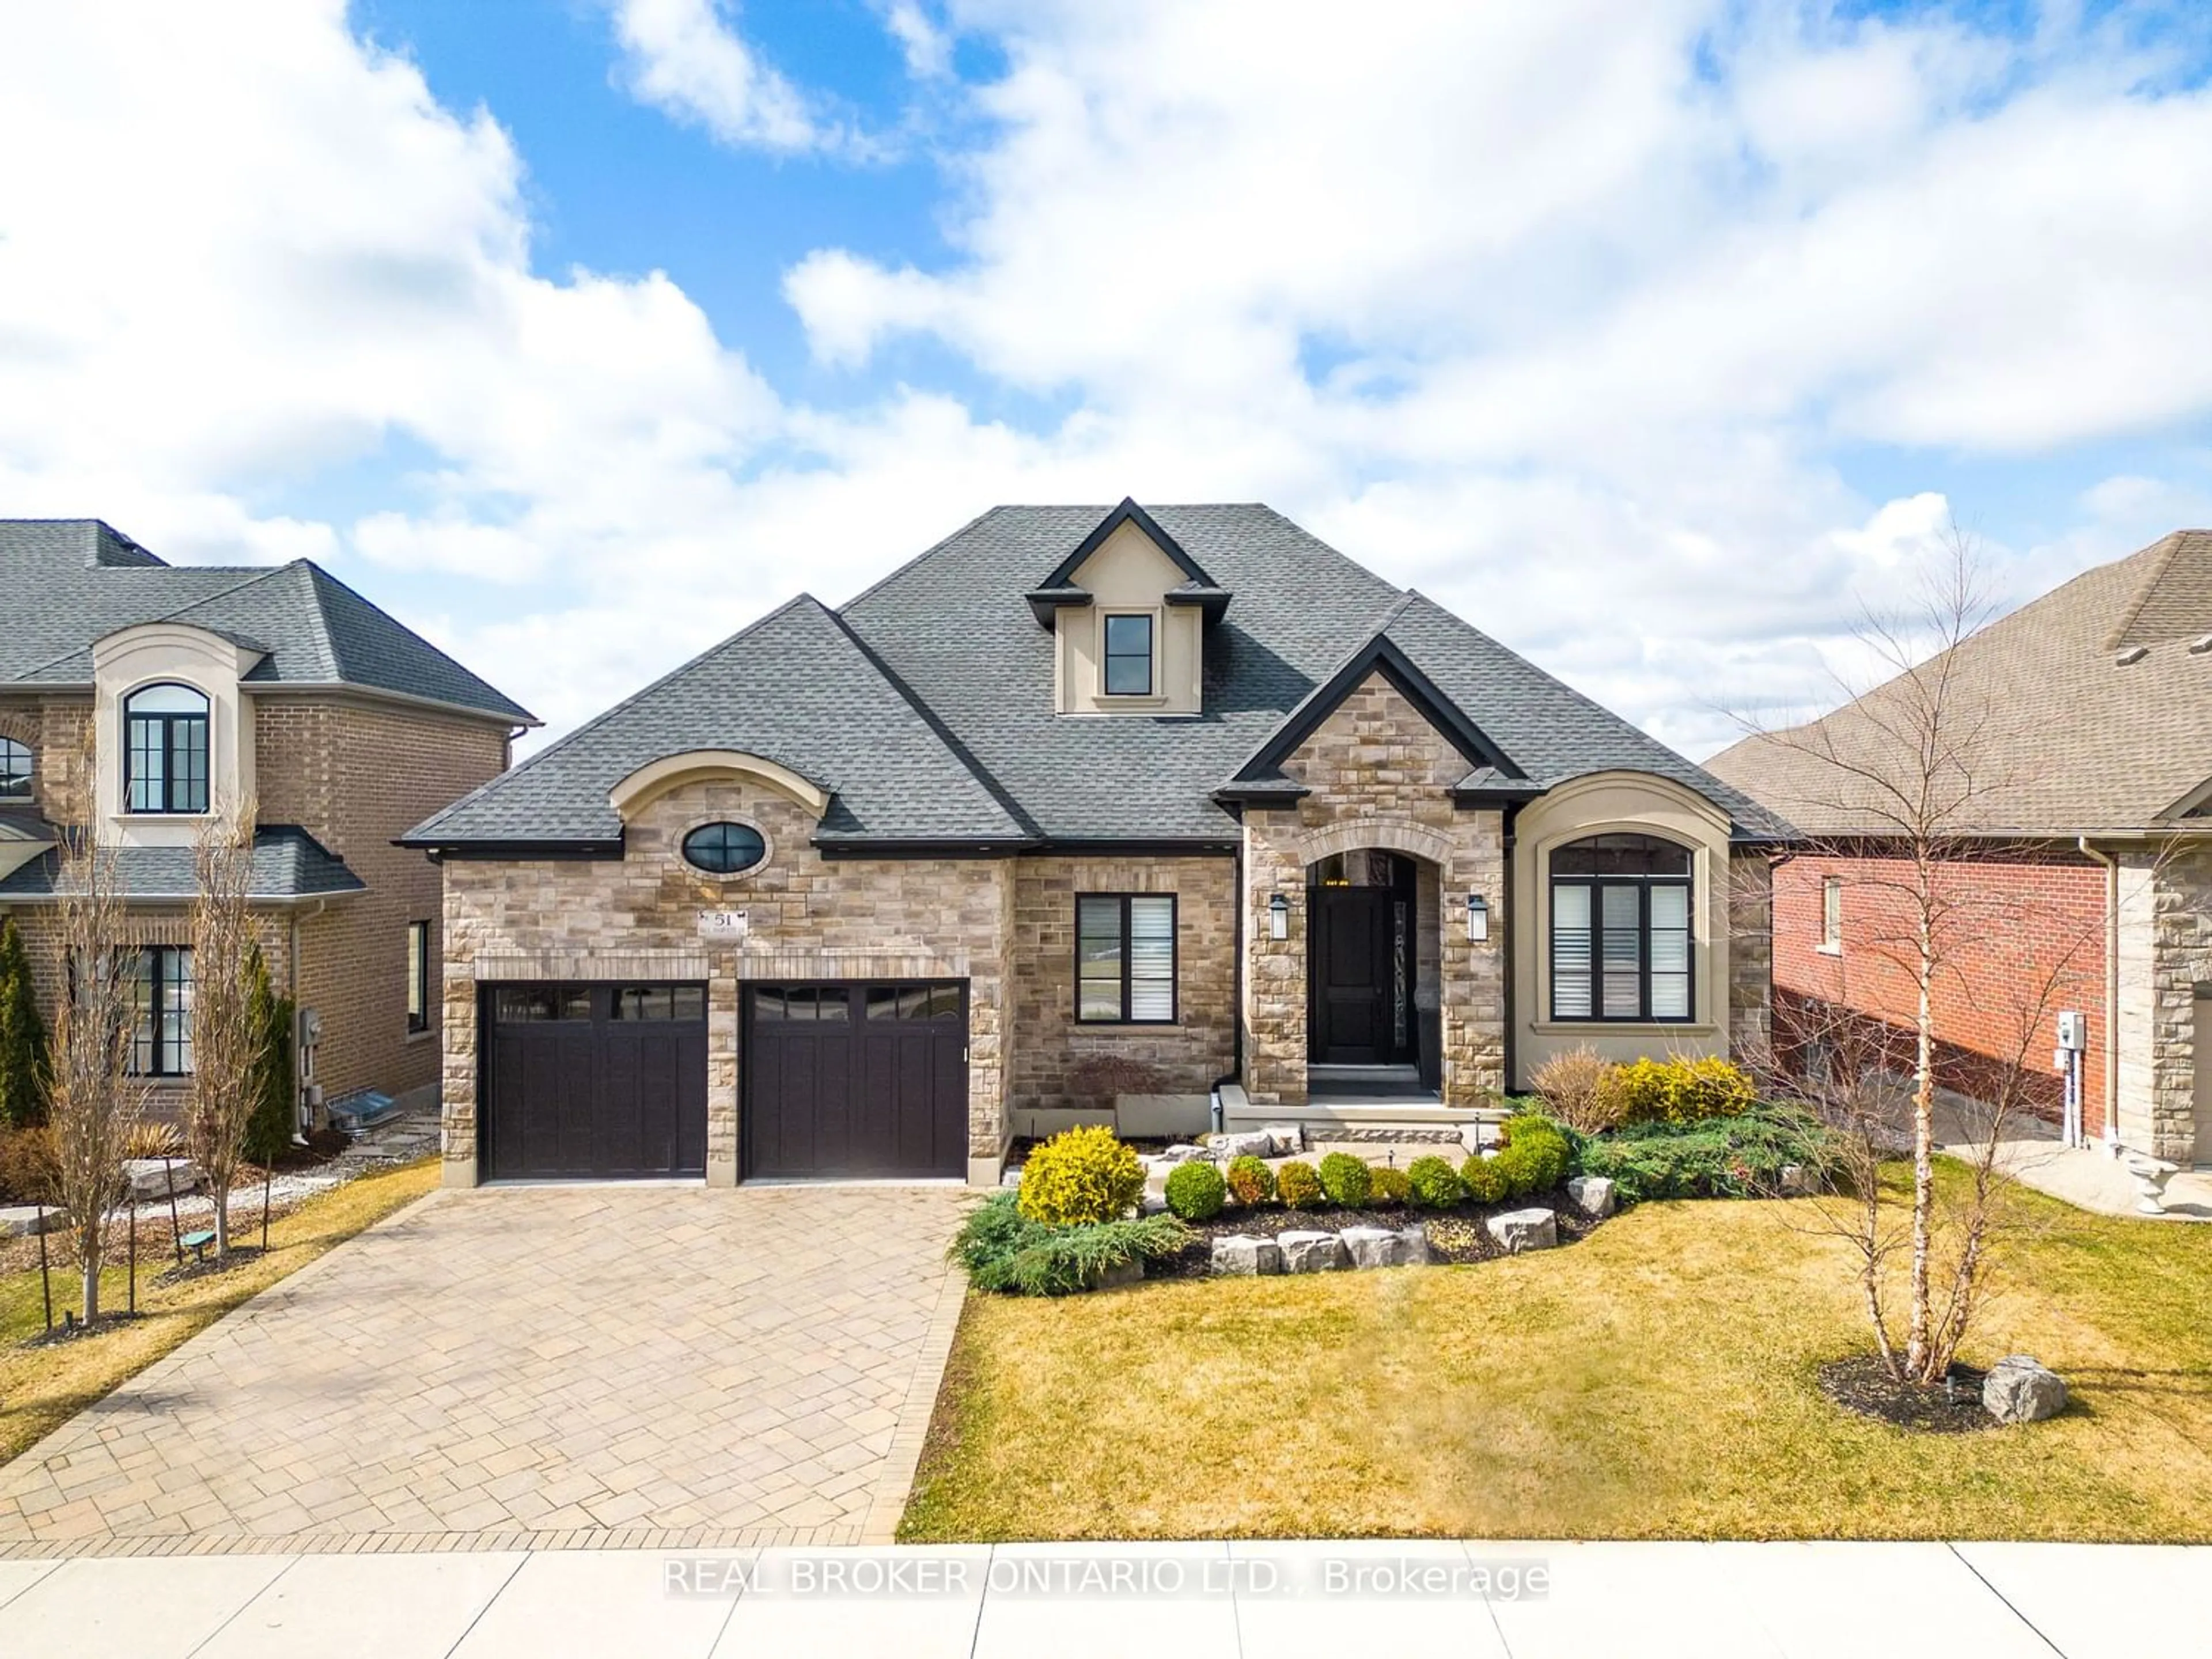 Home with brick exterior material for 51 Fall Harvest Dr, Kitchener Ontario N2P 0G6